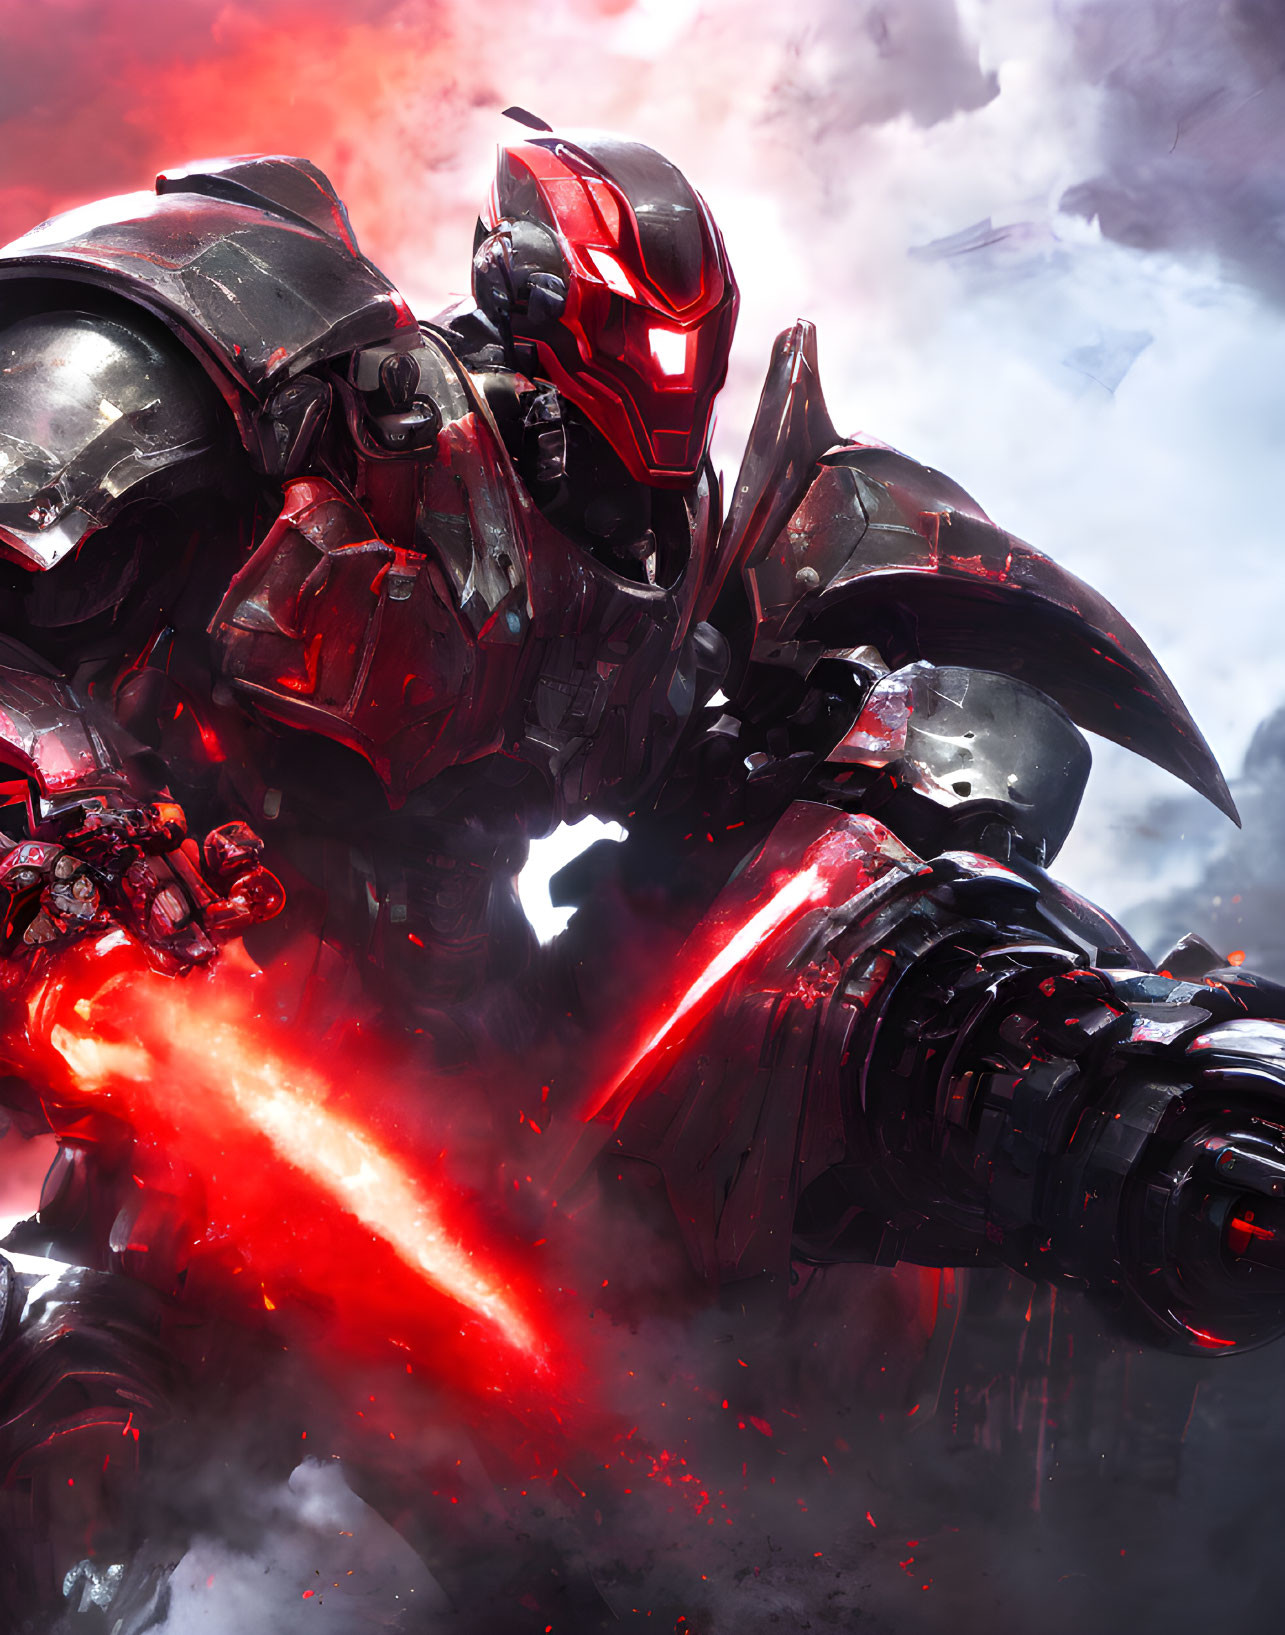 Giant robotic figure with red eyes and beam weapon in battle scene